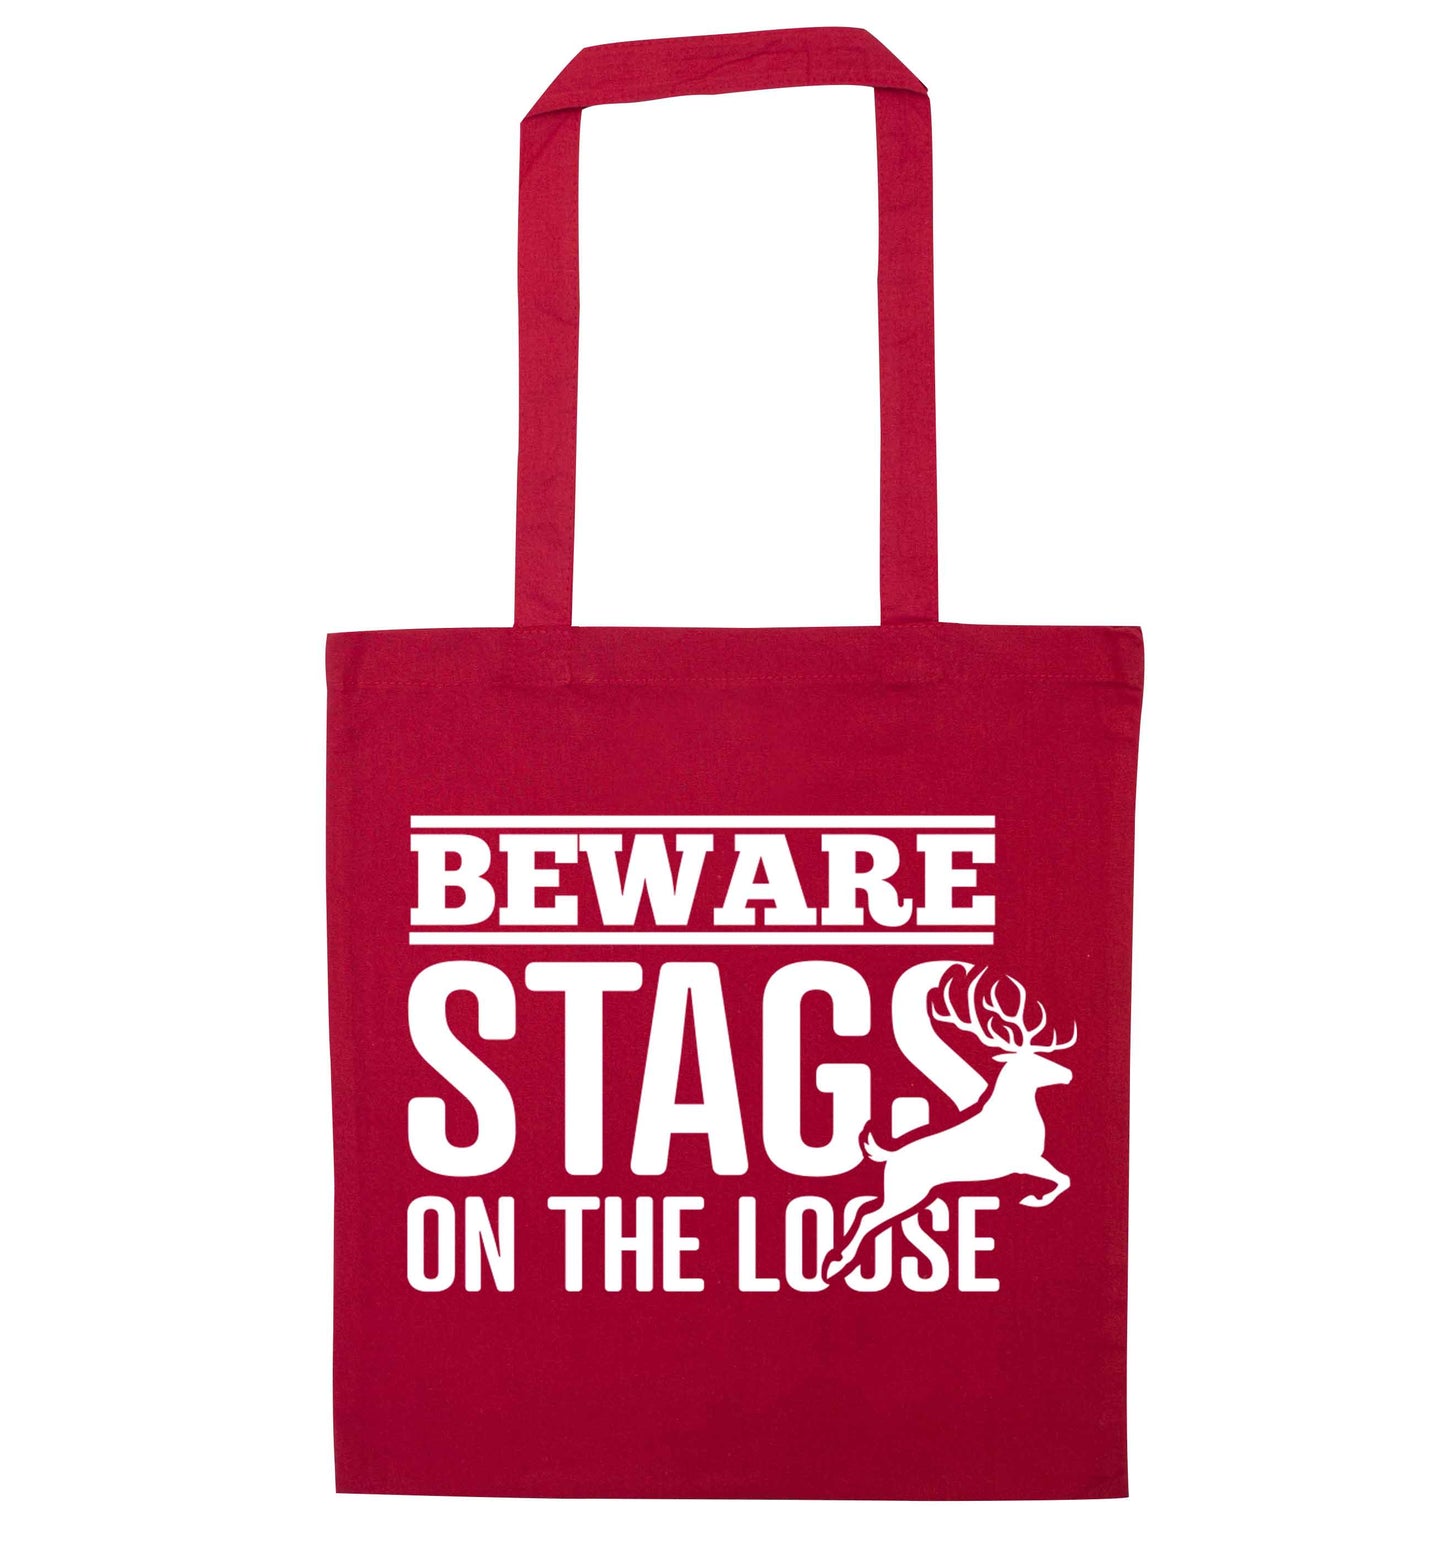 Beware stags on the loose red tote bag